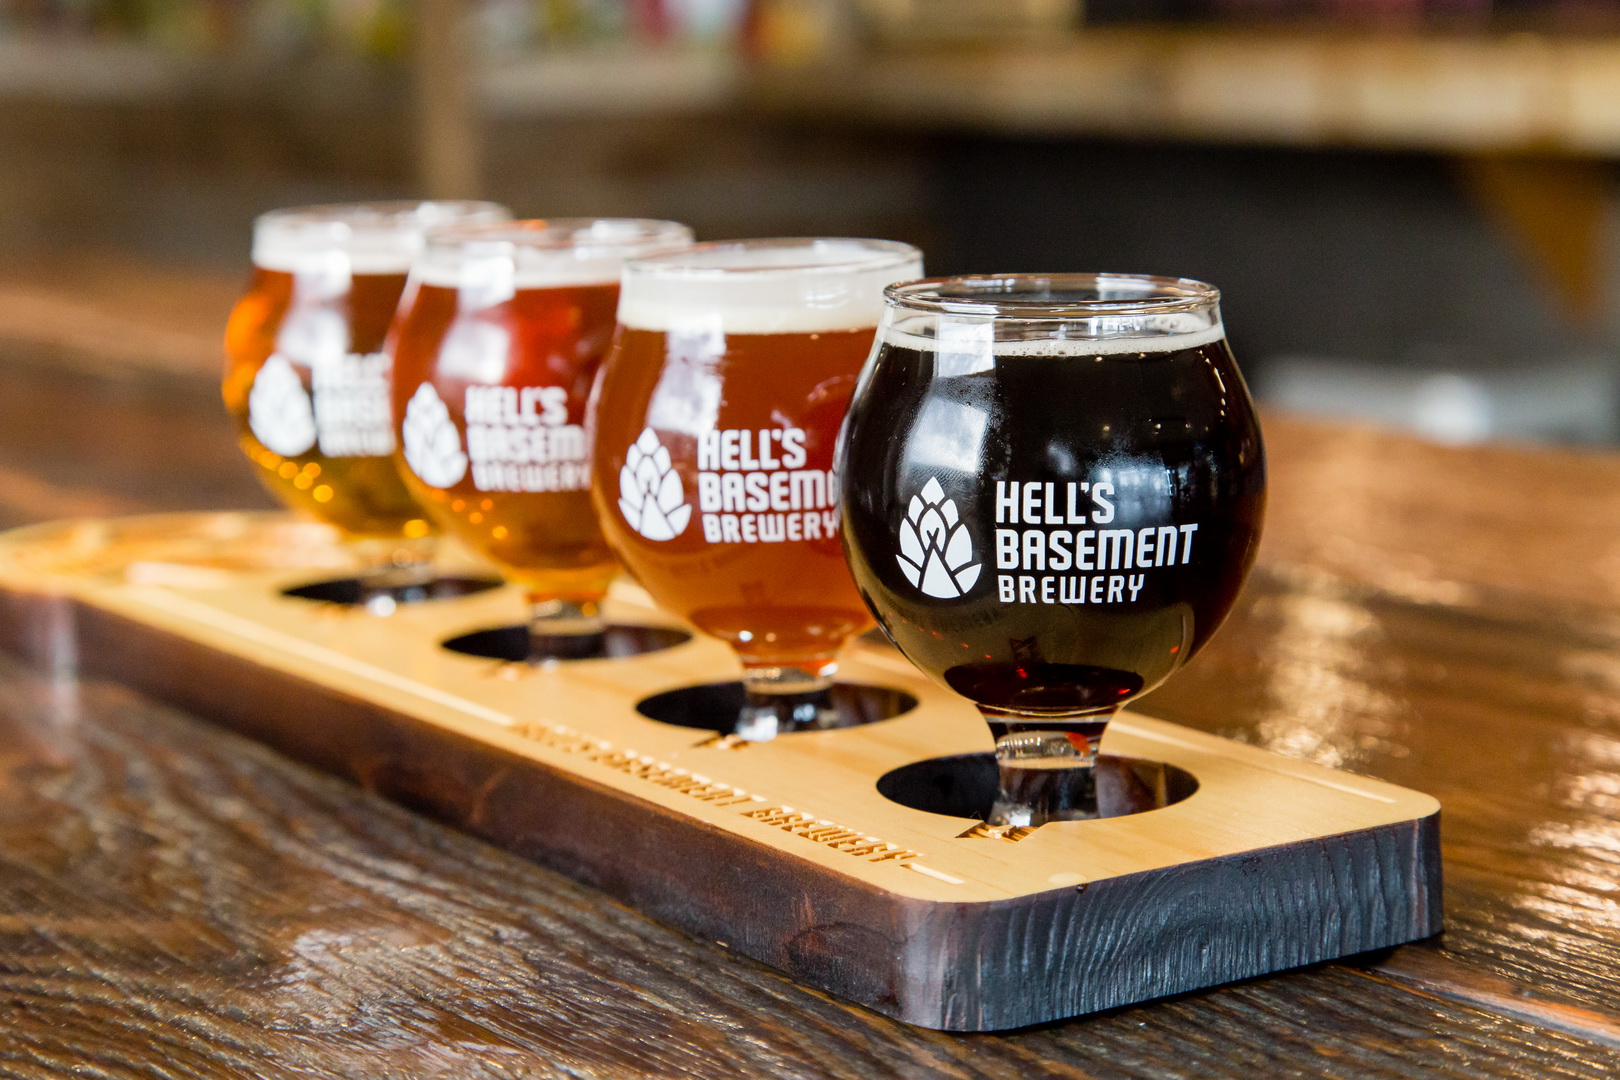 A beautifully prepared flight of Hell's Basement beers!